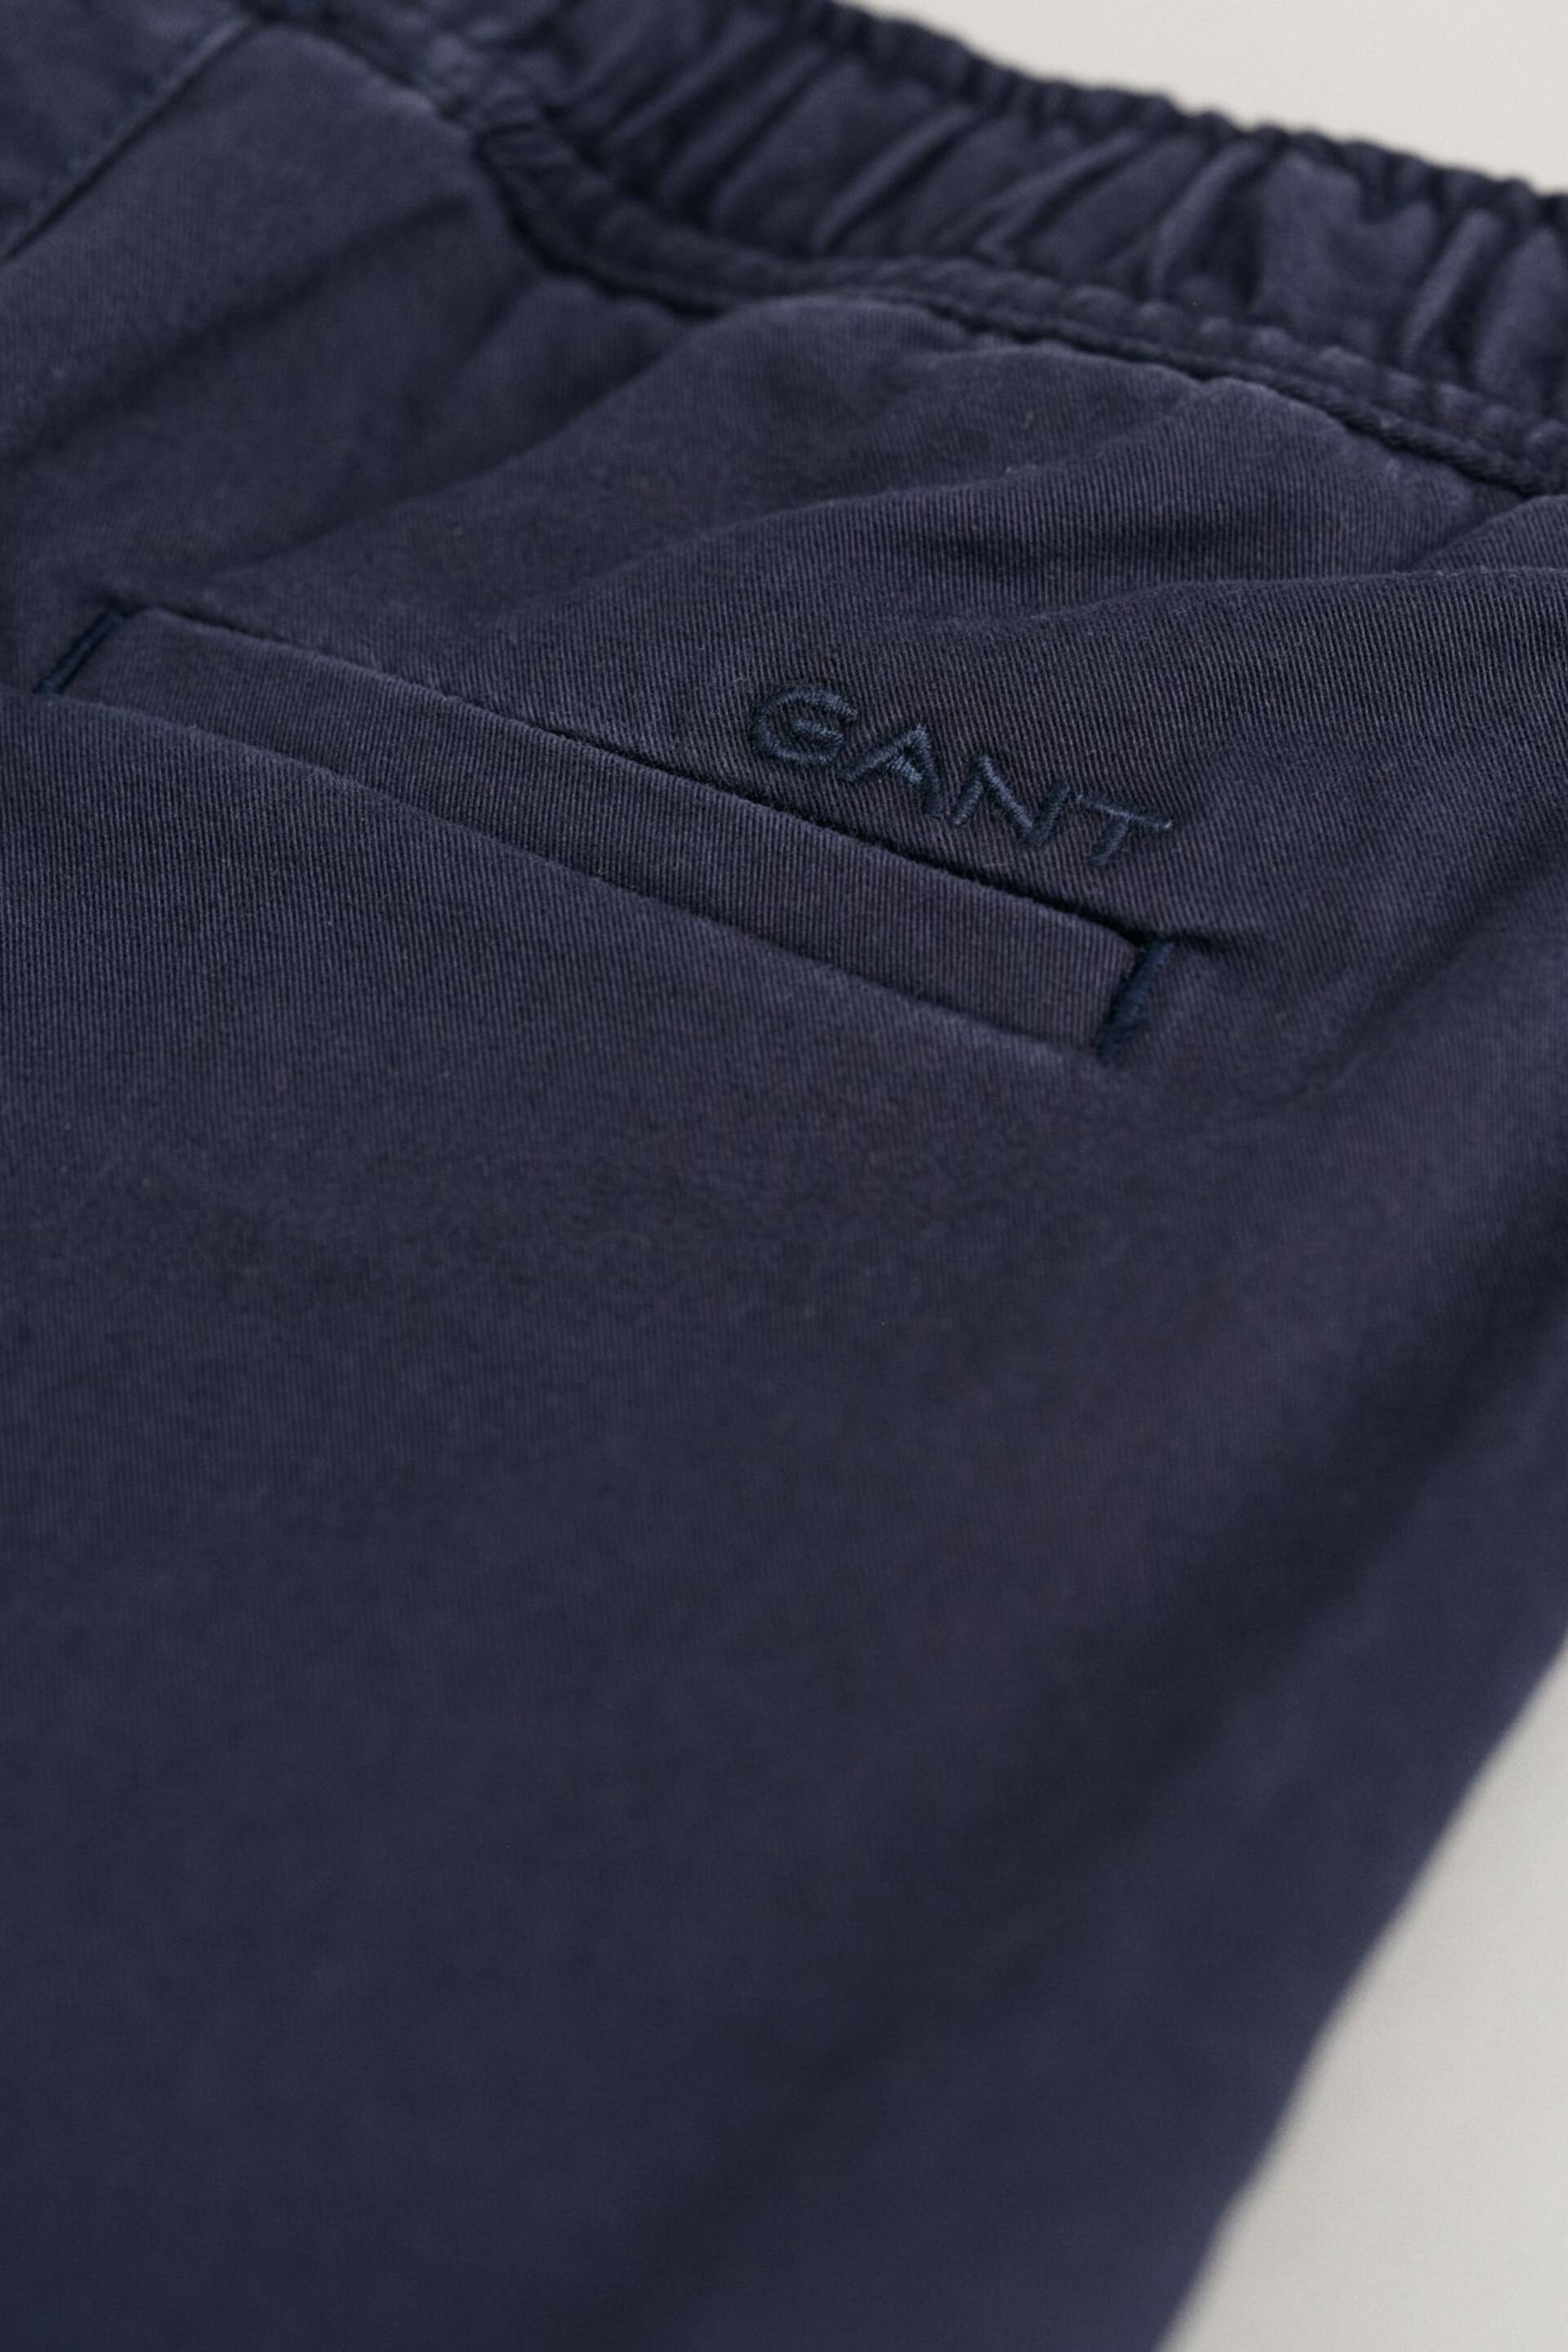 GANT Kids Woven Pull-On Trousers - Image 3 of 3